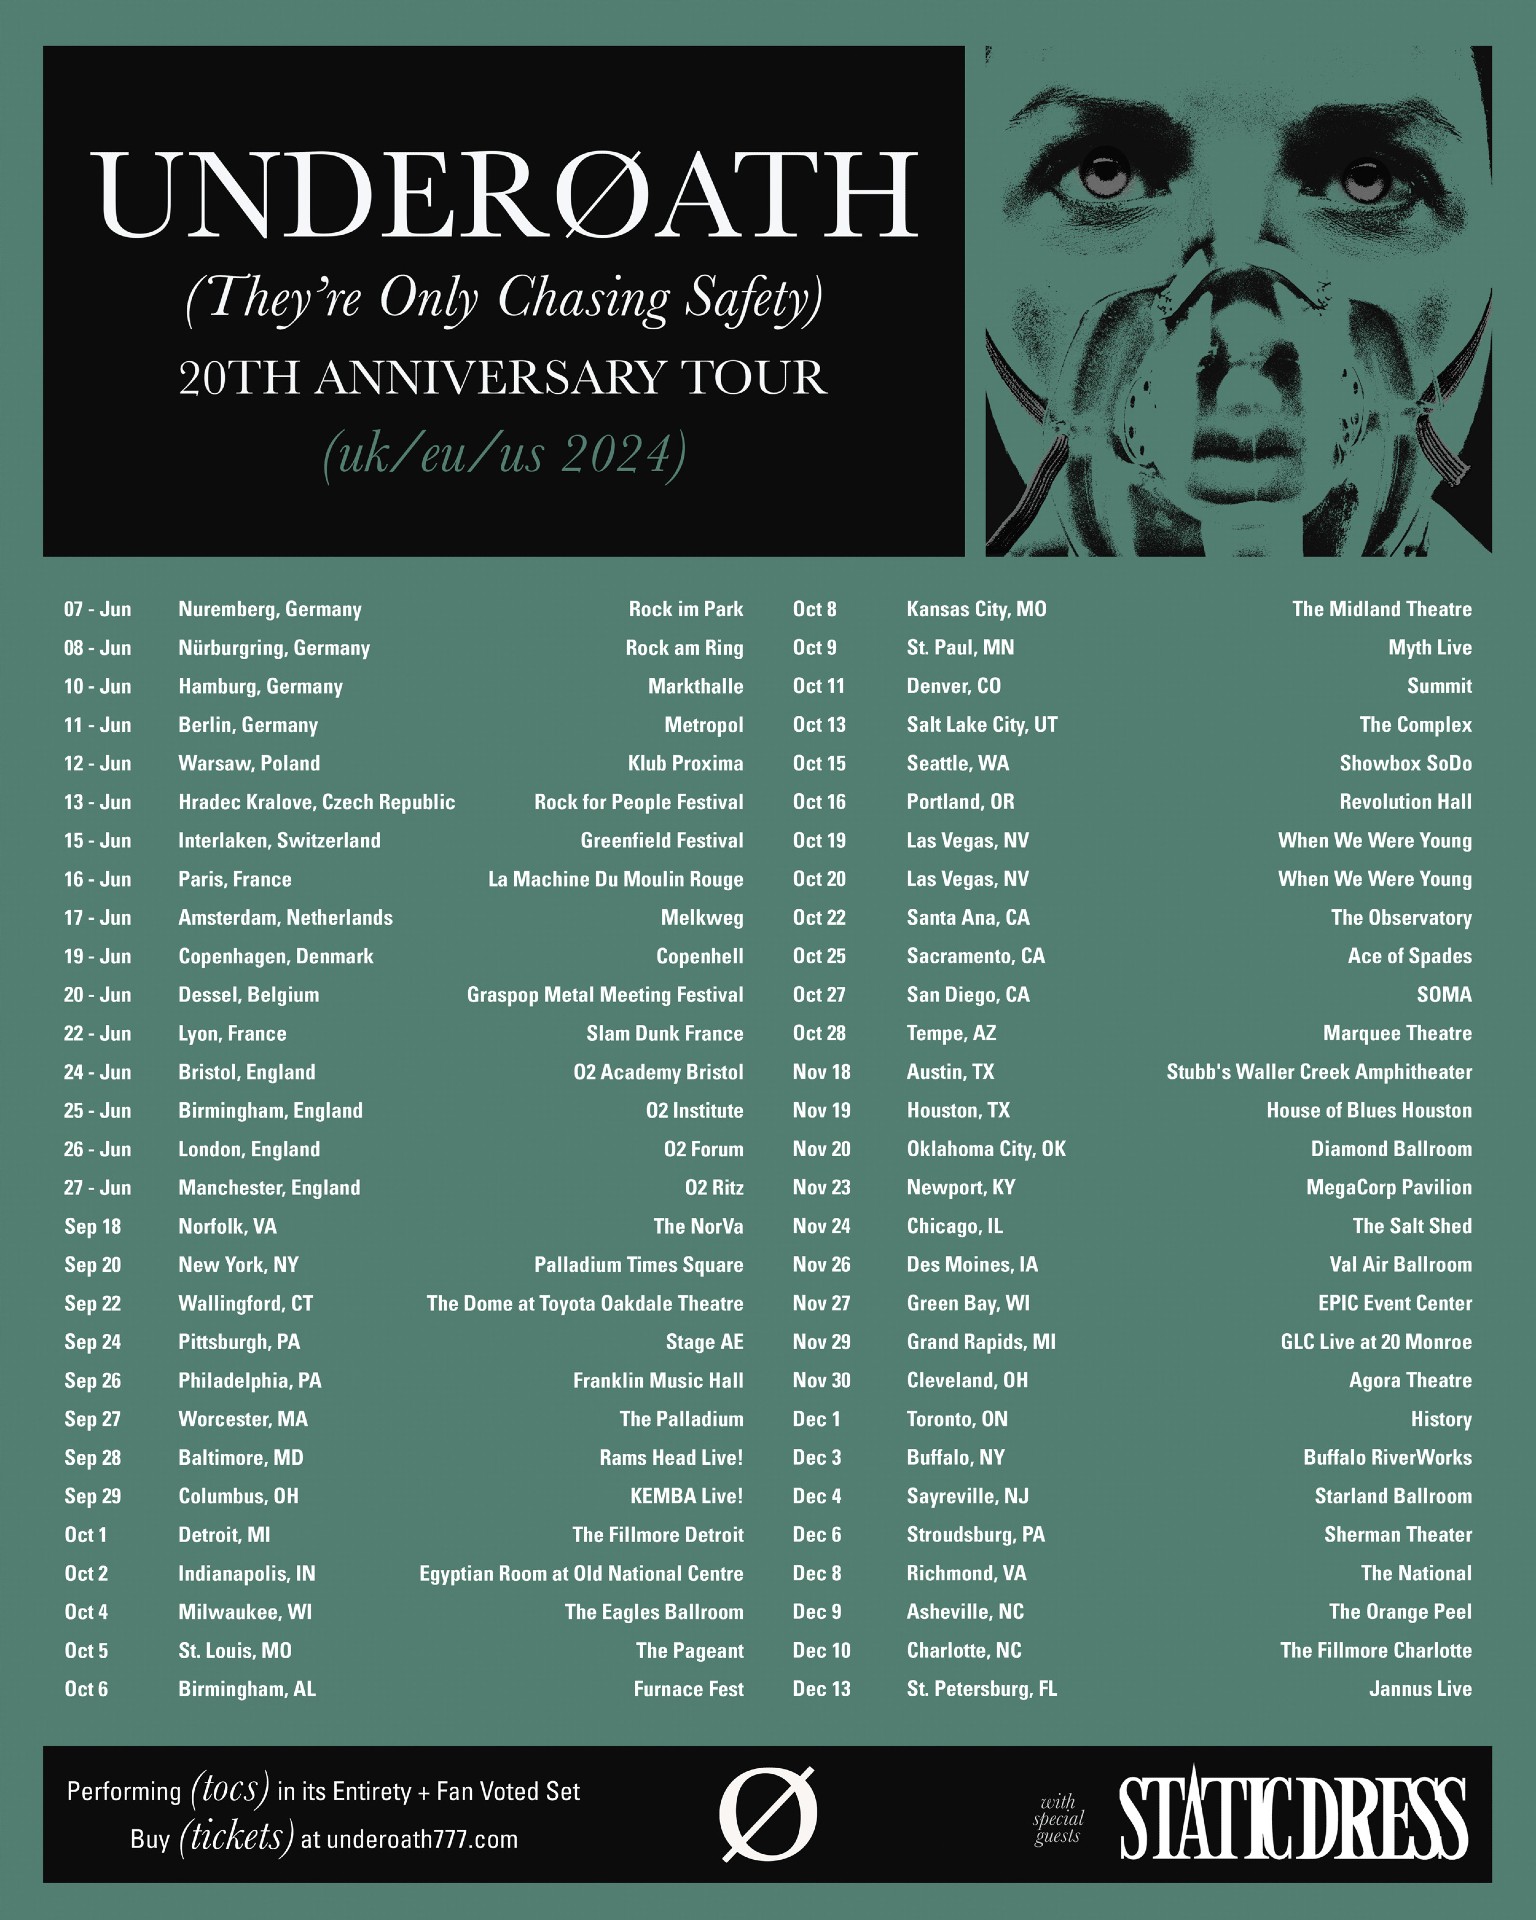 Underøath “The 20th Anniversary Tour” admat